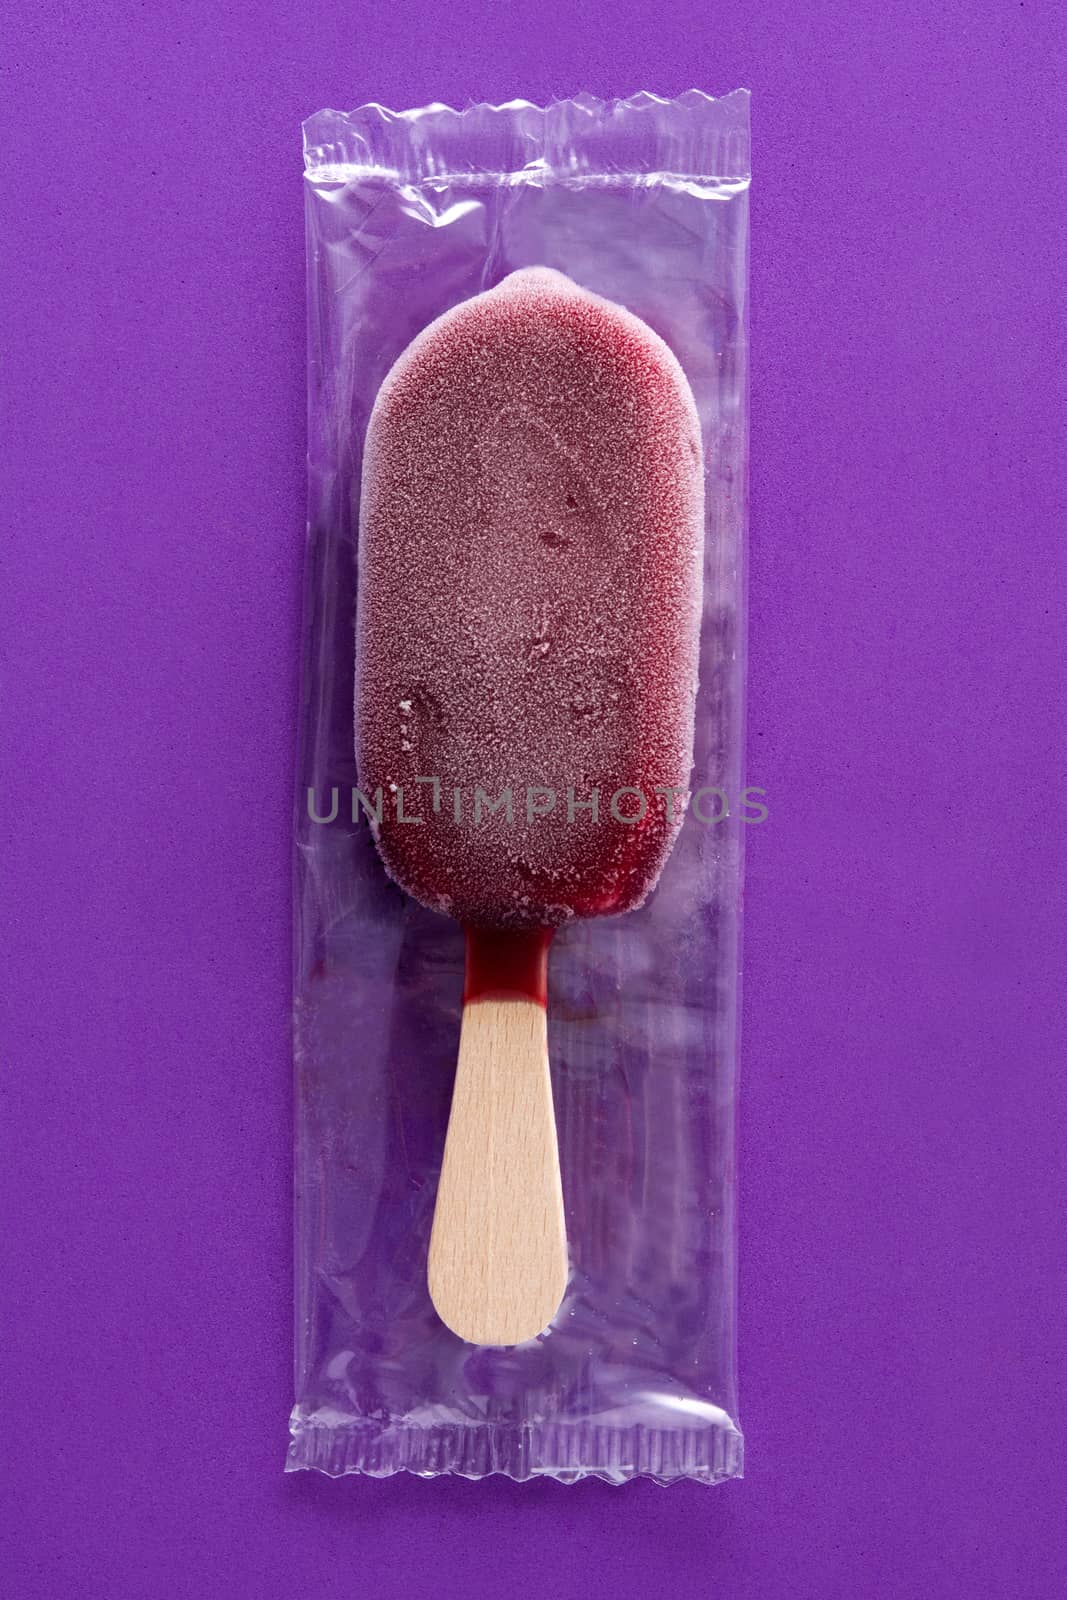 Packed strawberry popsicle on violet background.